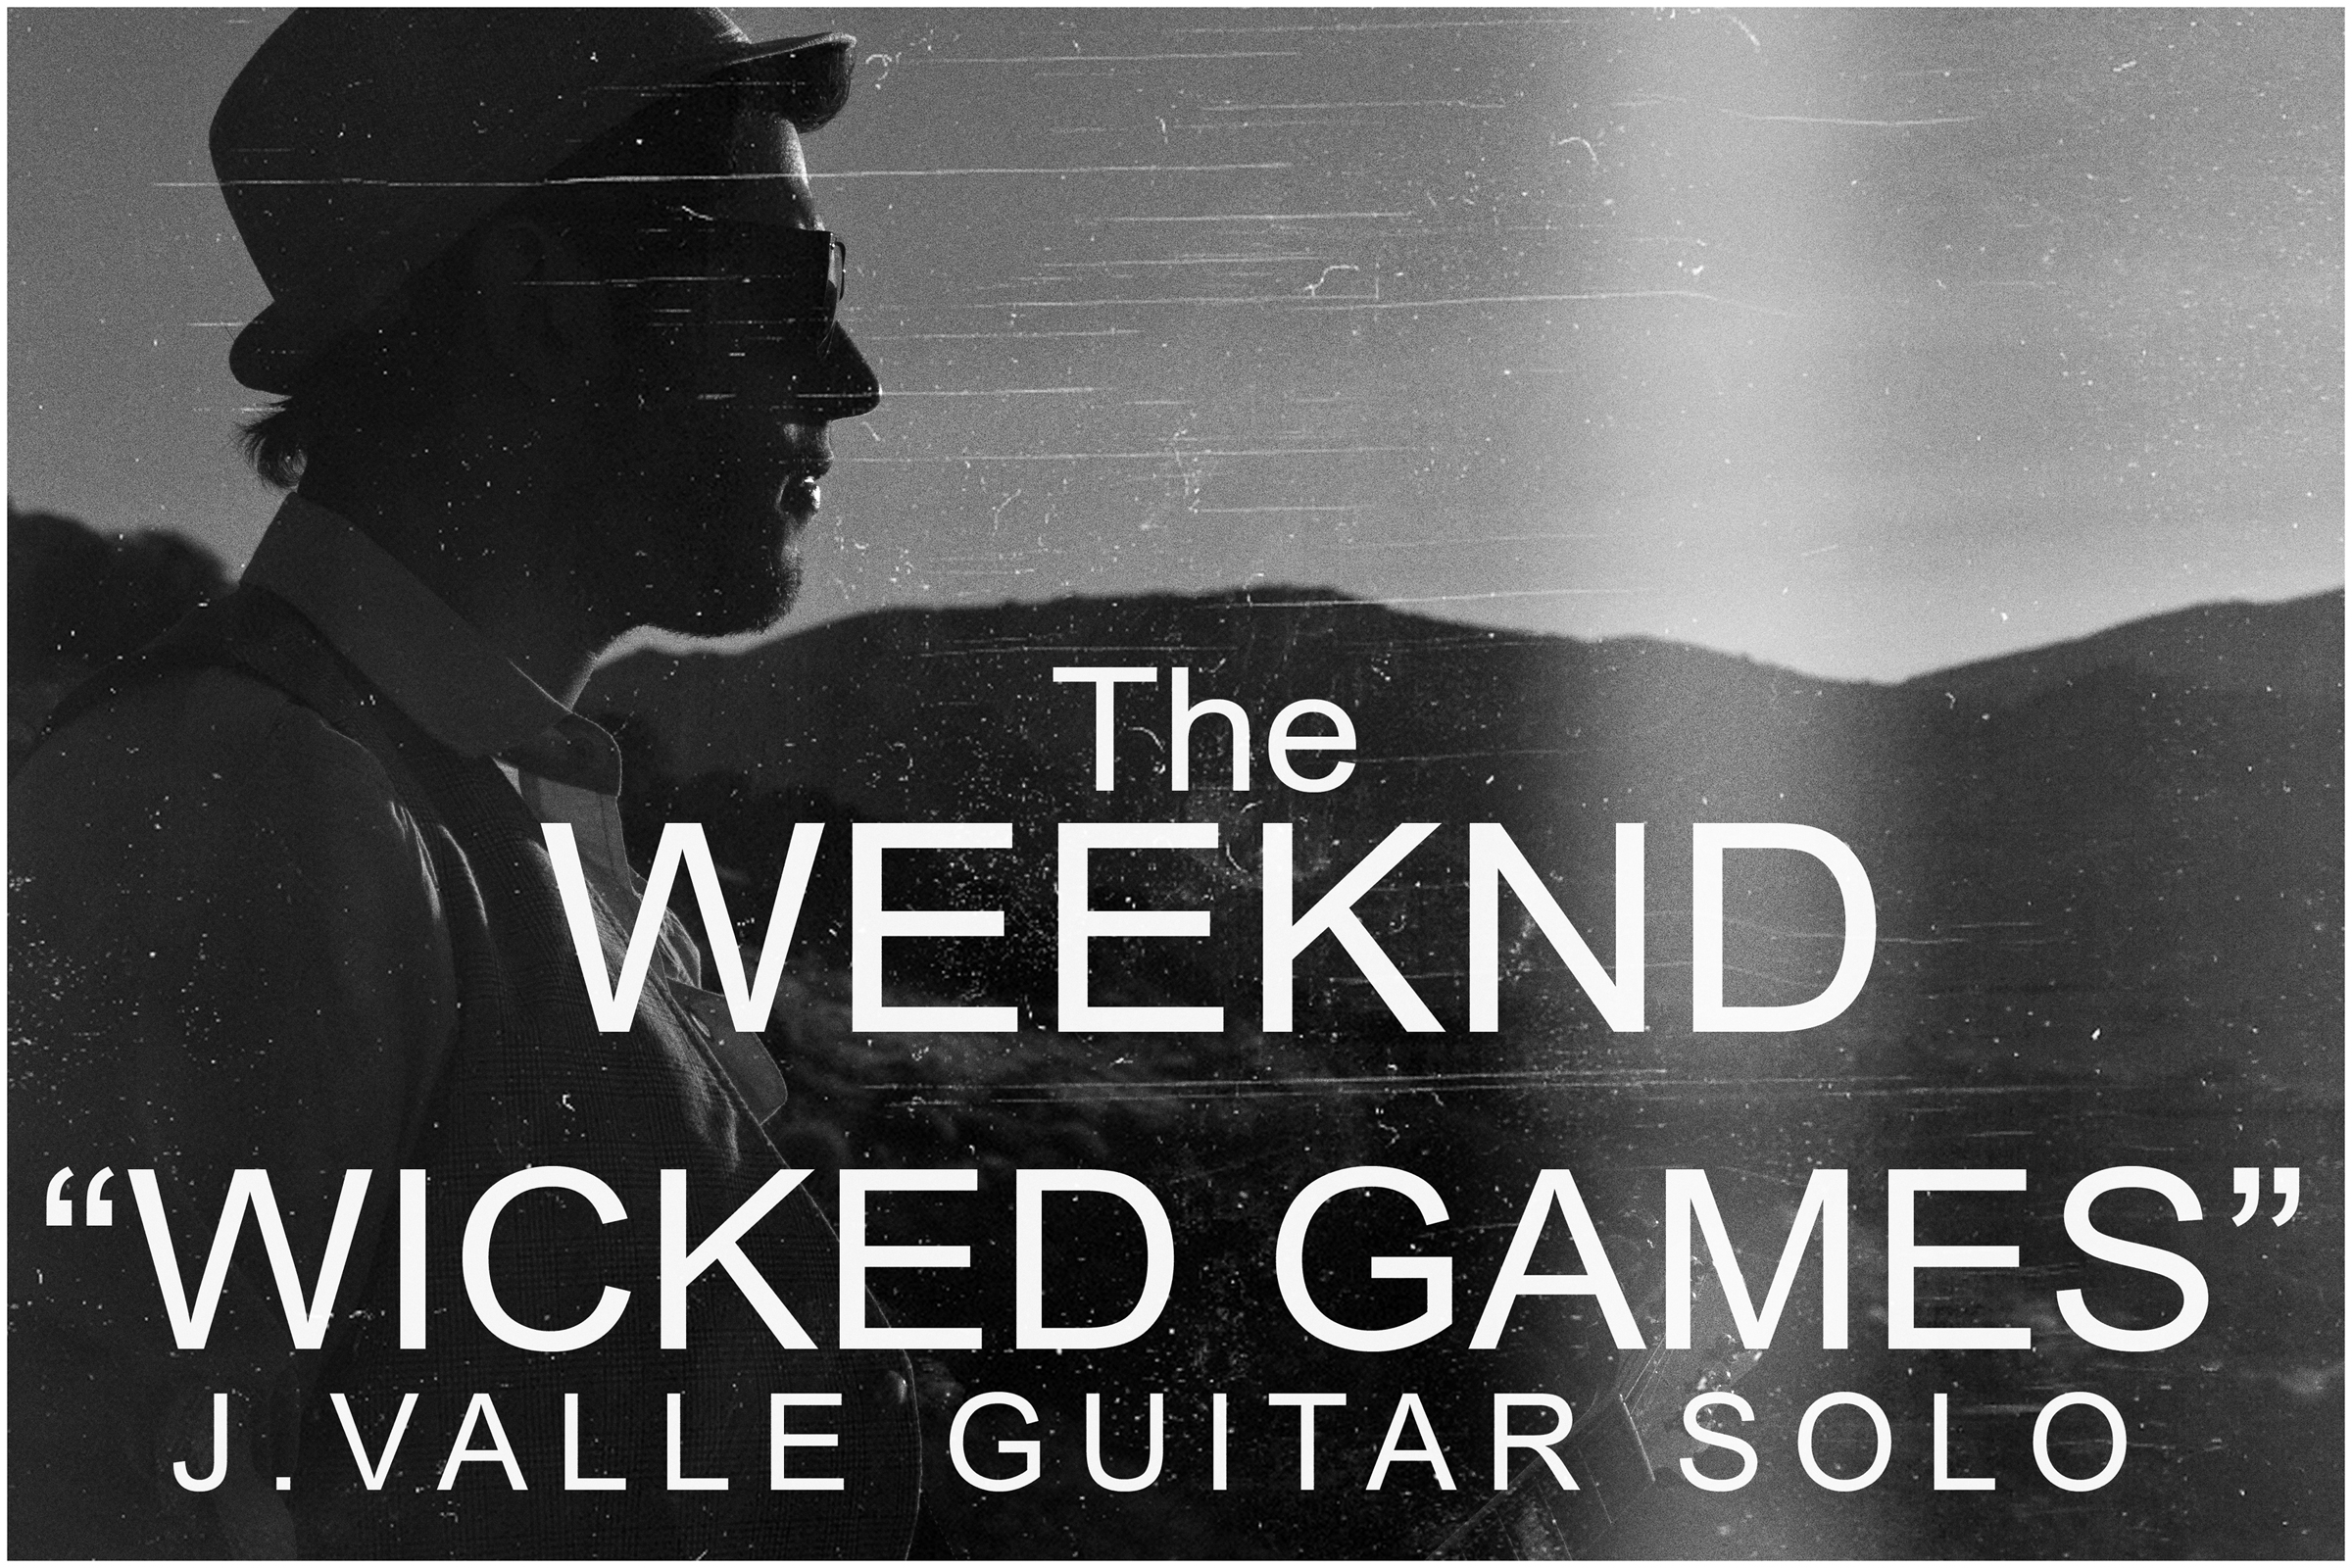 The Weeknd Wicked Games Mp3 Hulk